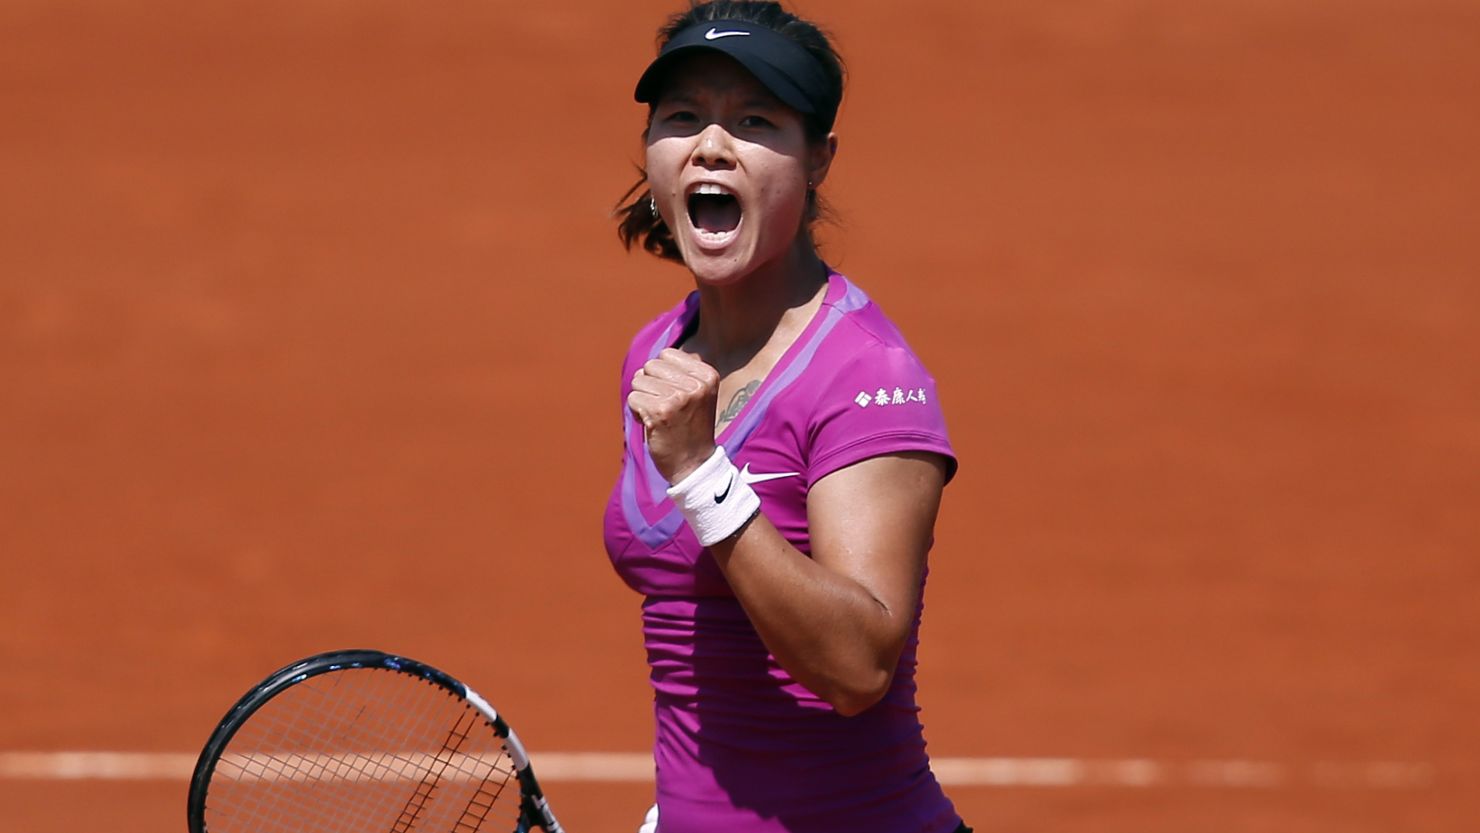 Li Na is the only Chinese singles player remaining at the French Open following Saturday's third-round results.